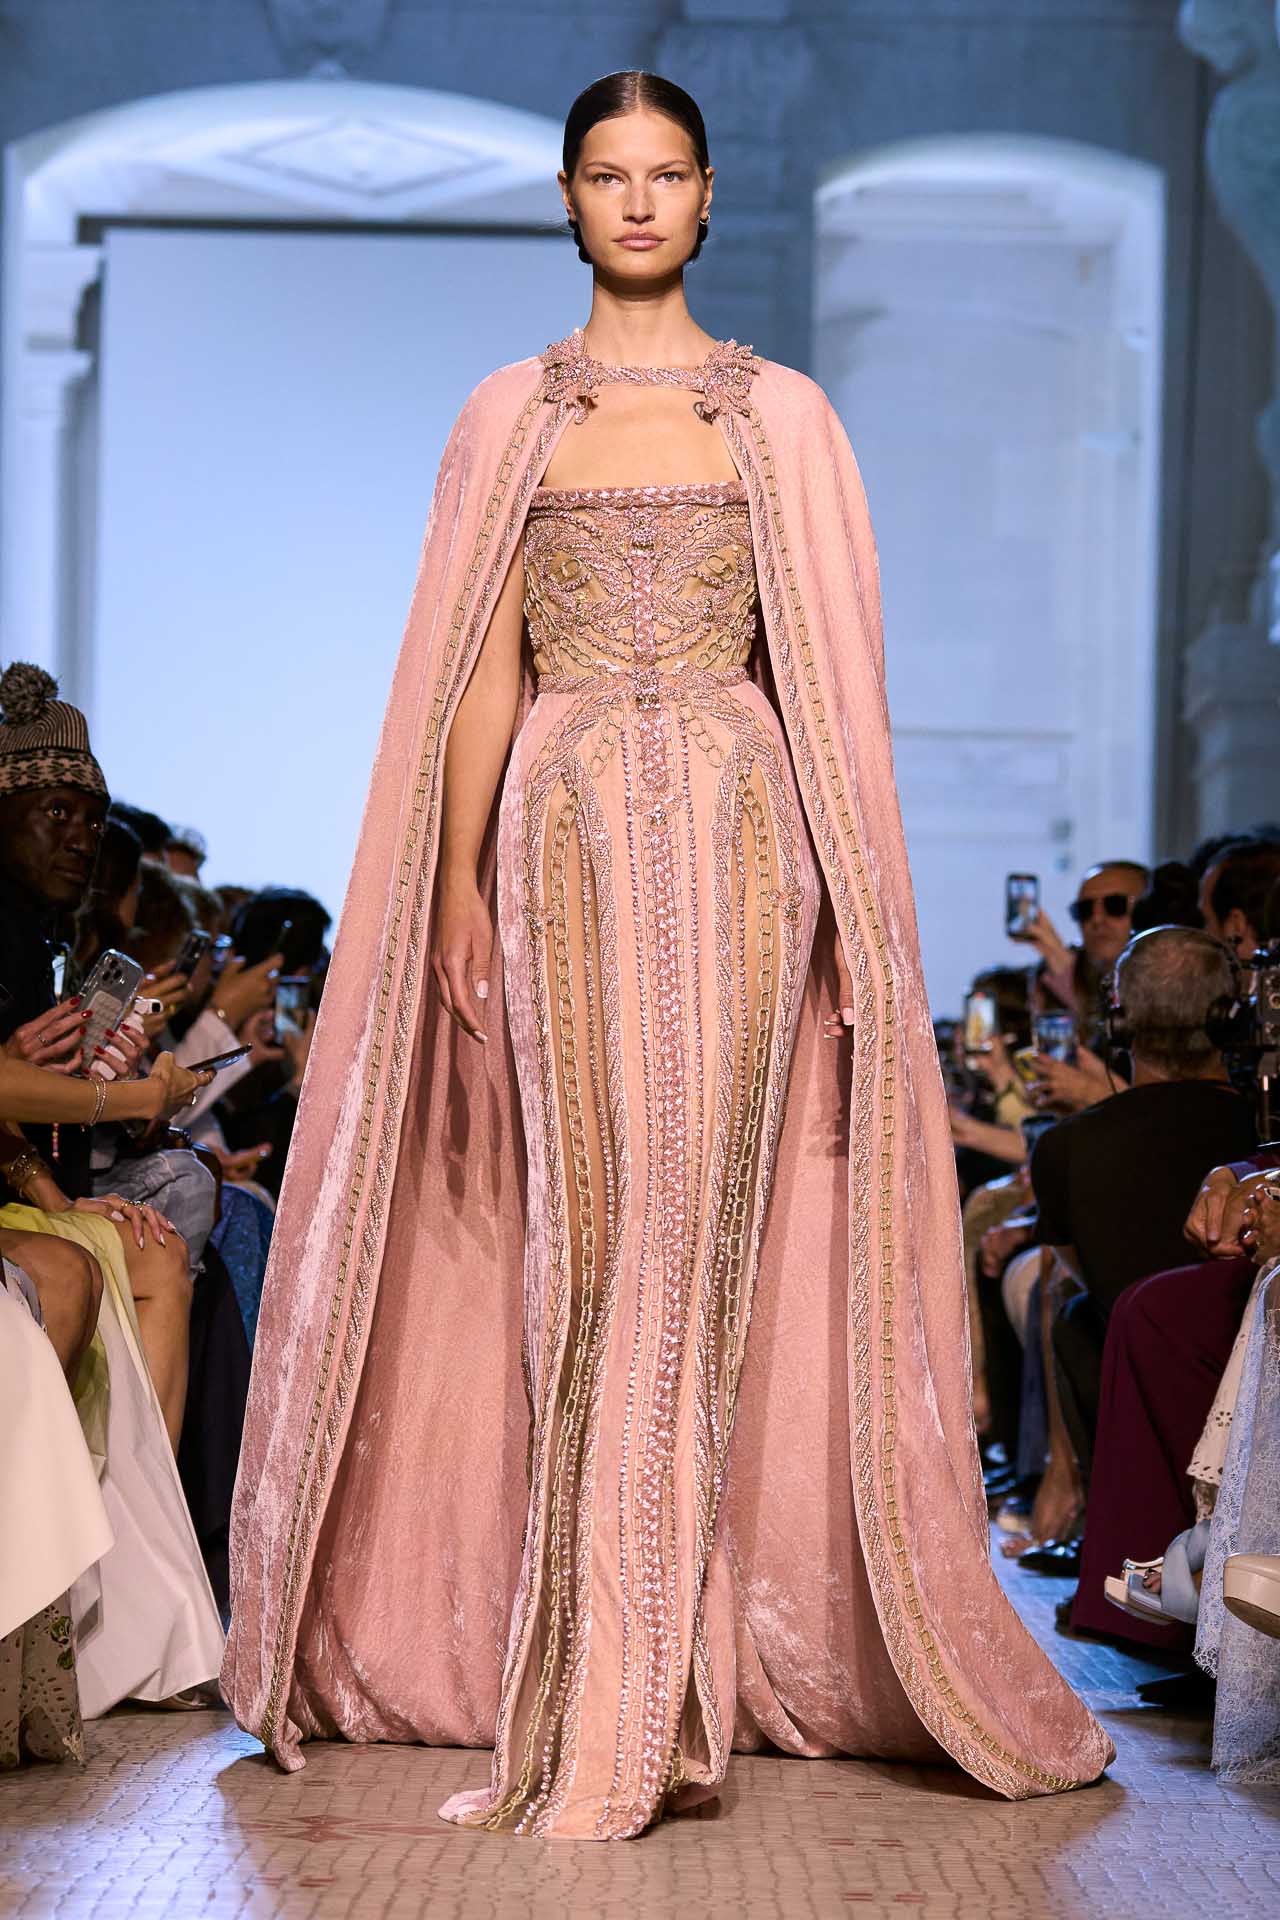 Elie Saab Bridal Spring 2023 Collection Is Here And It's An Ode To